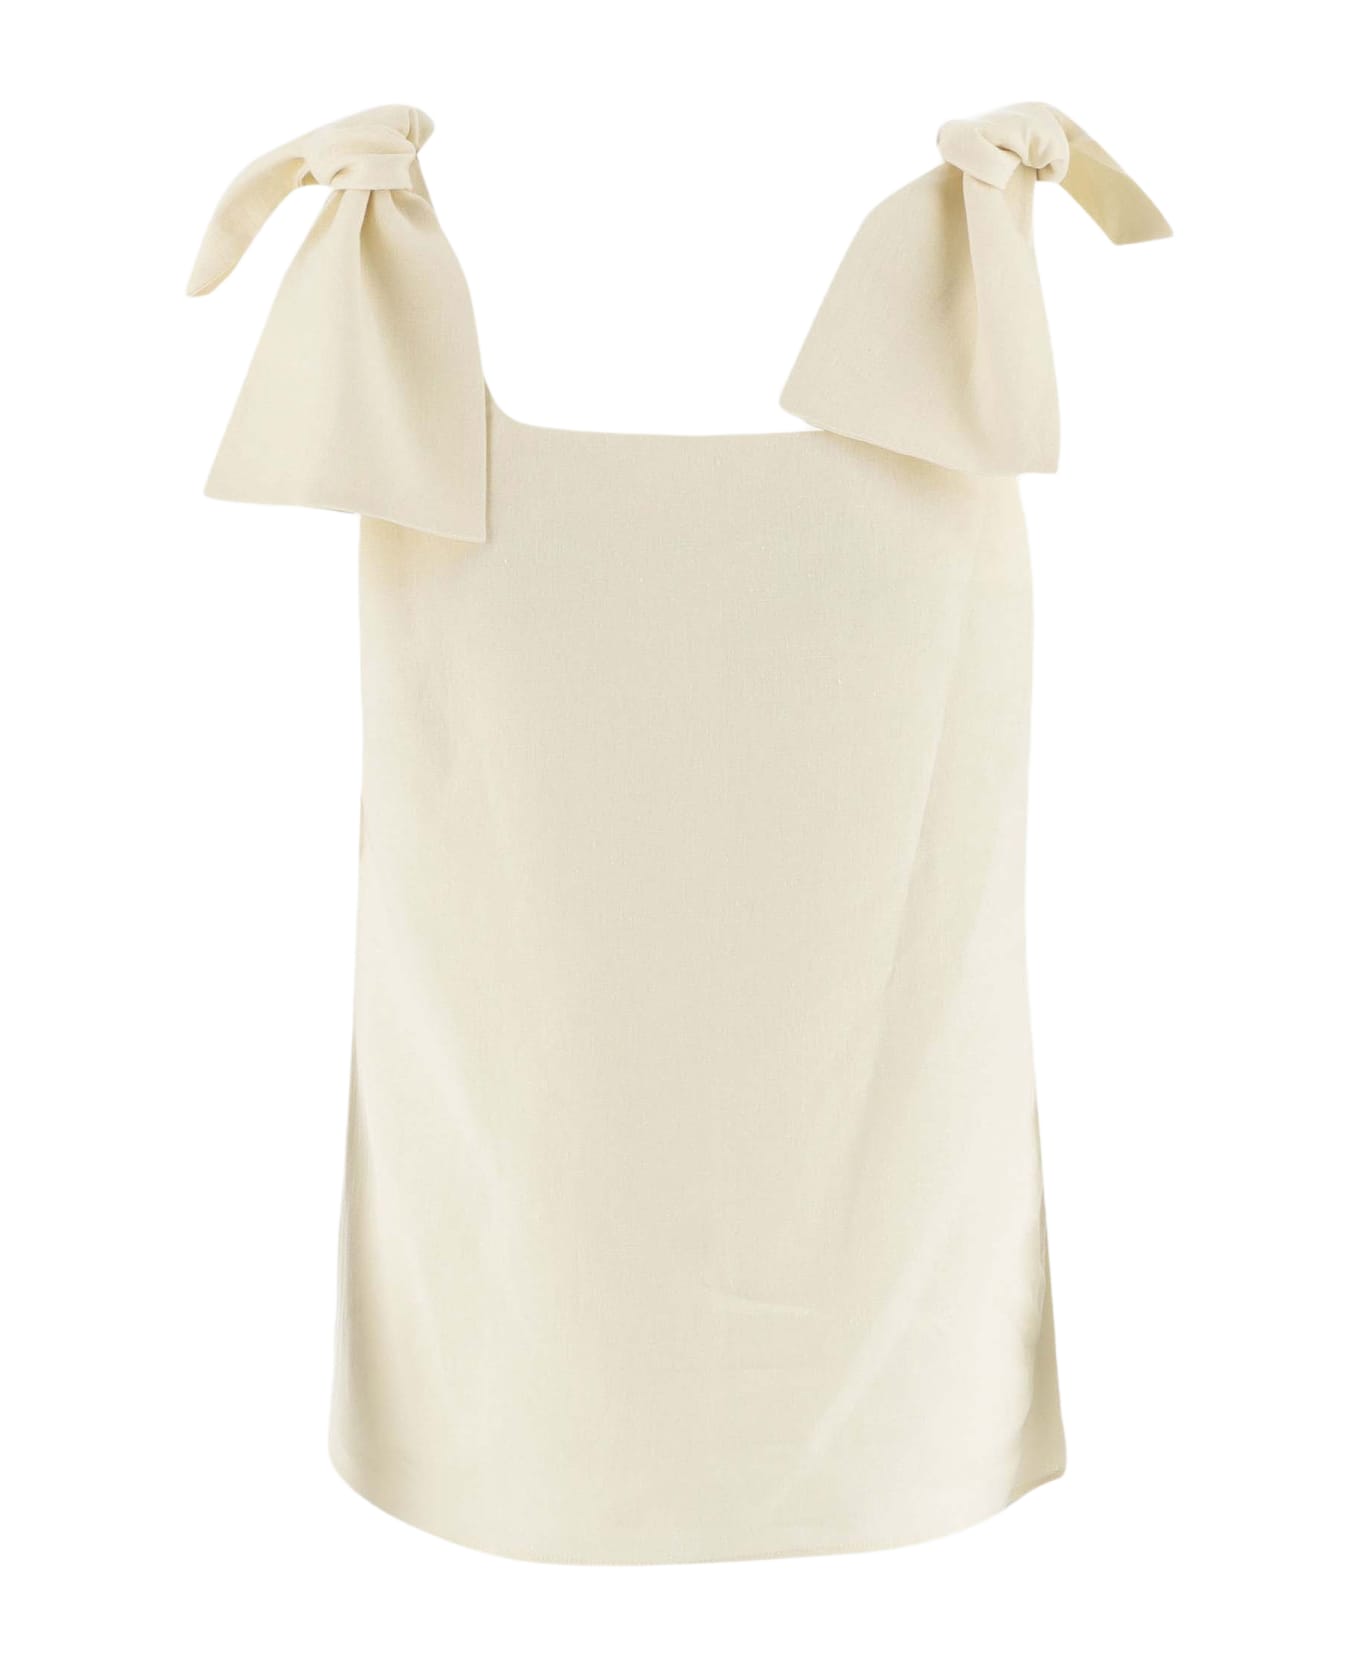 Chloé Tank Top With Bow On The Straps - White タンクトップ